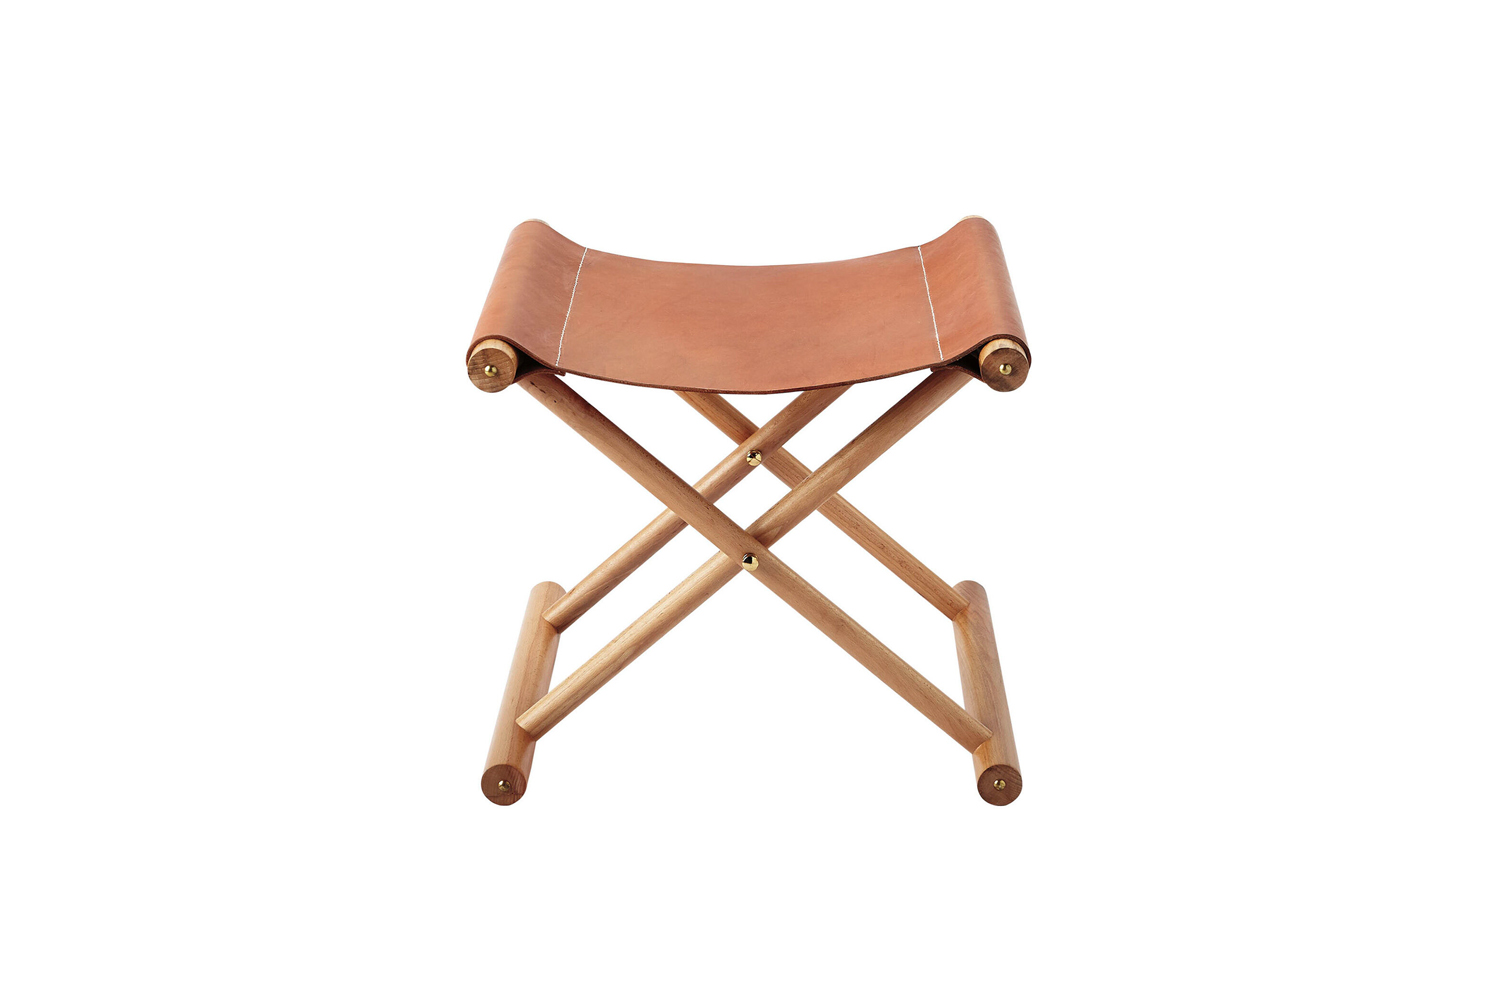 Serena & Lily Cooper Leather Stool Saddle